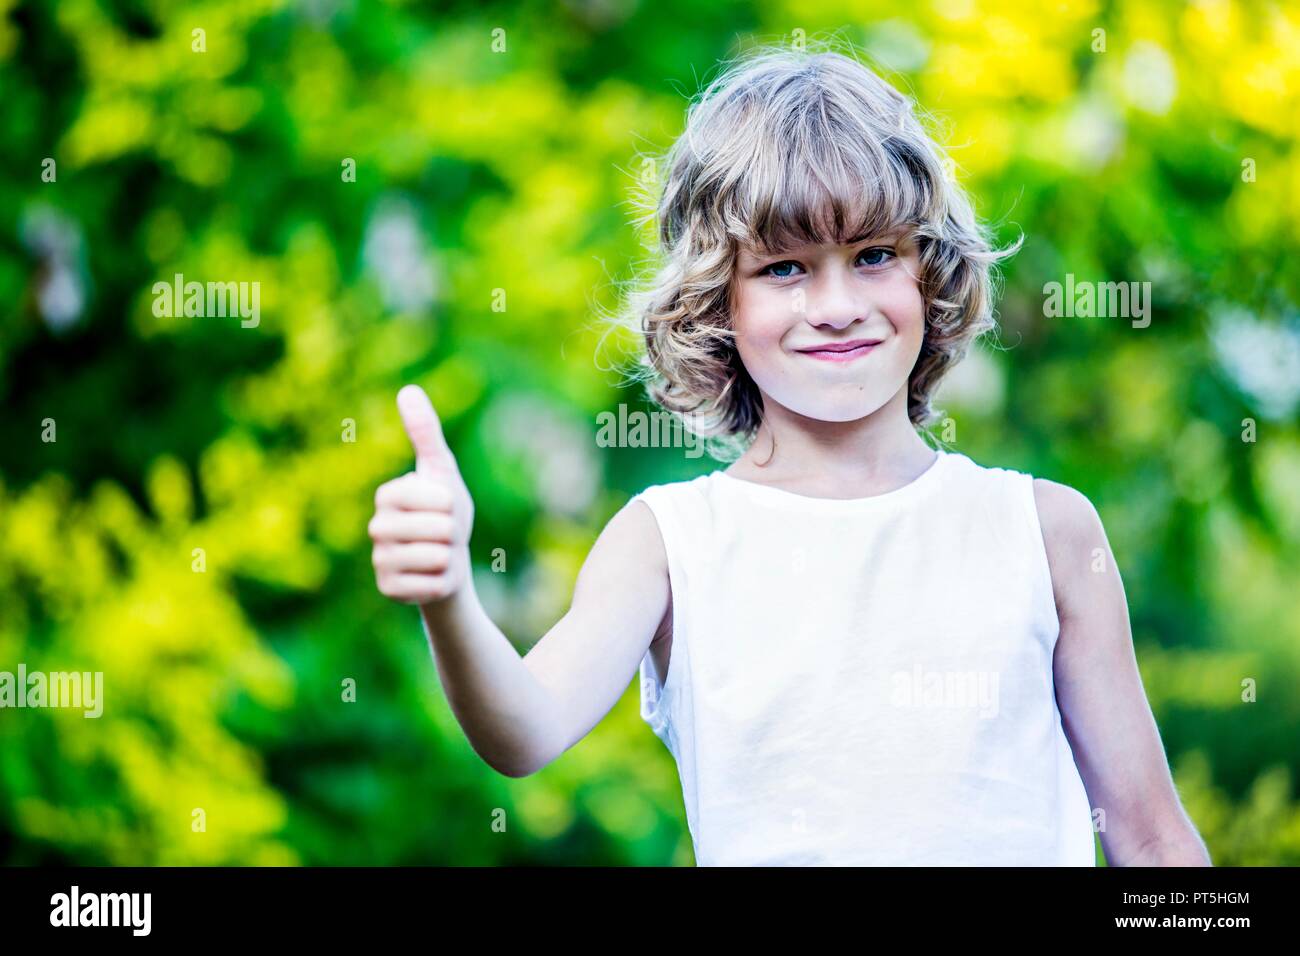 Portrait of young boy showing thumbs up, smiling. Stock Photo